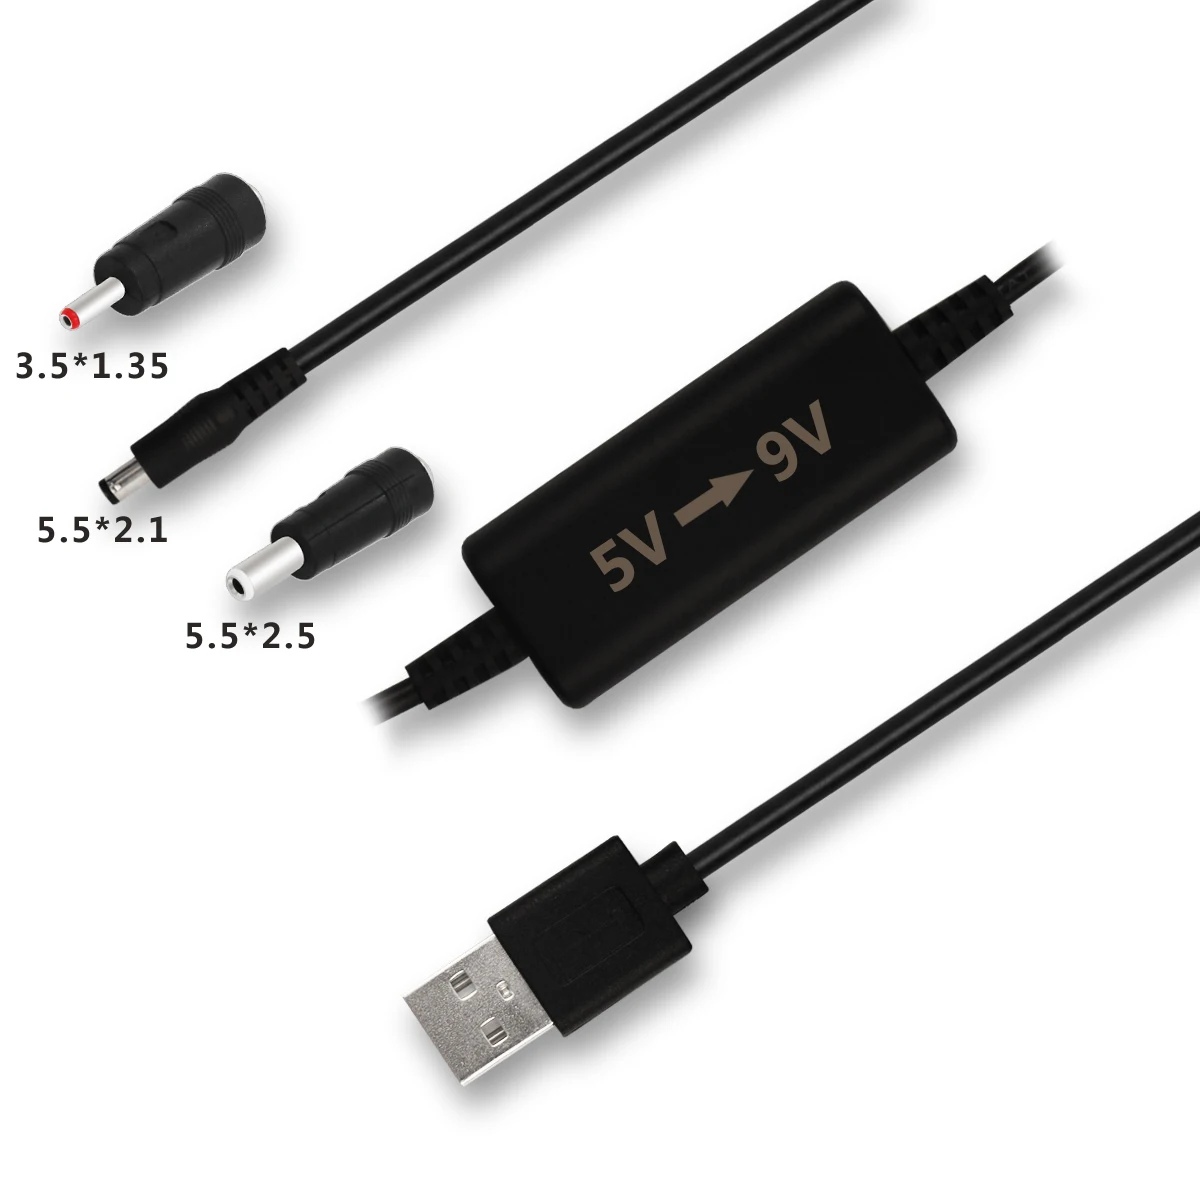 USB Charge Power Boost Cable DC 5V to 9V/12V 1A 2.1x5.5mm Step UP